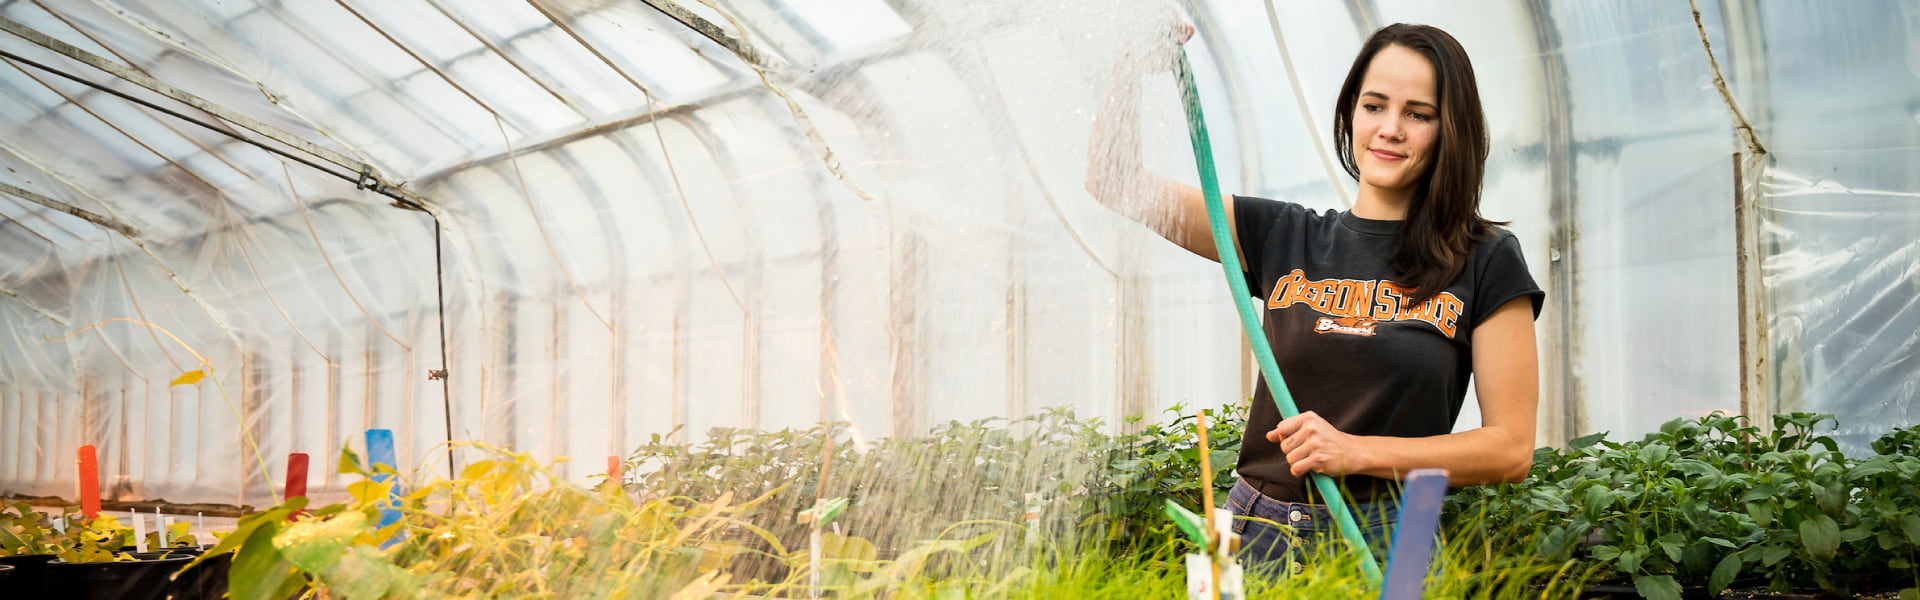 person at work in a greenhouse, wearing OSU shirt and watering grass in containers